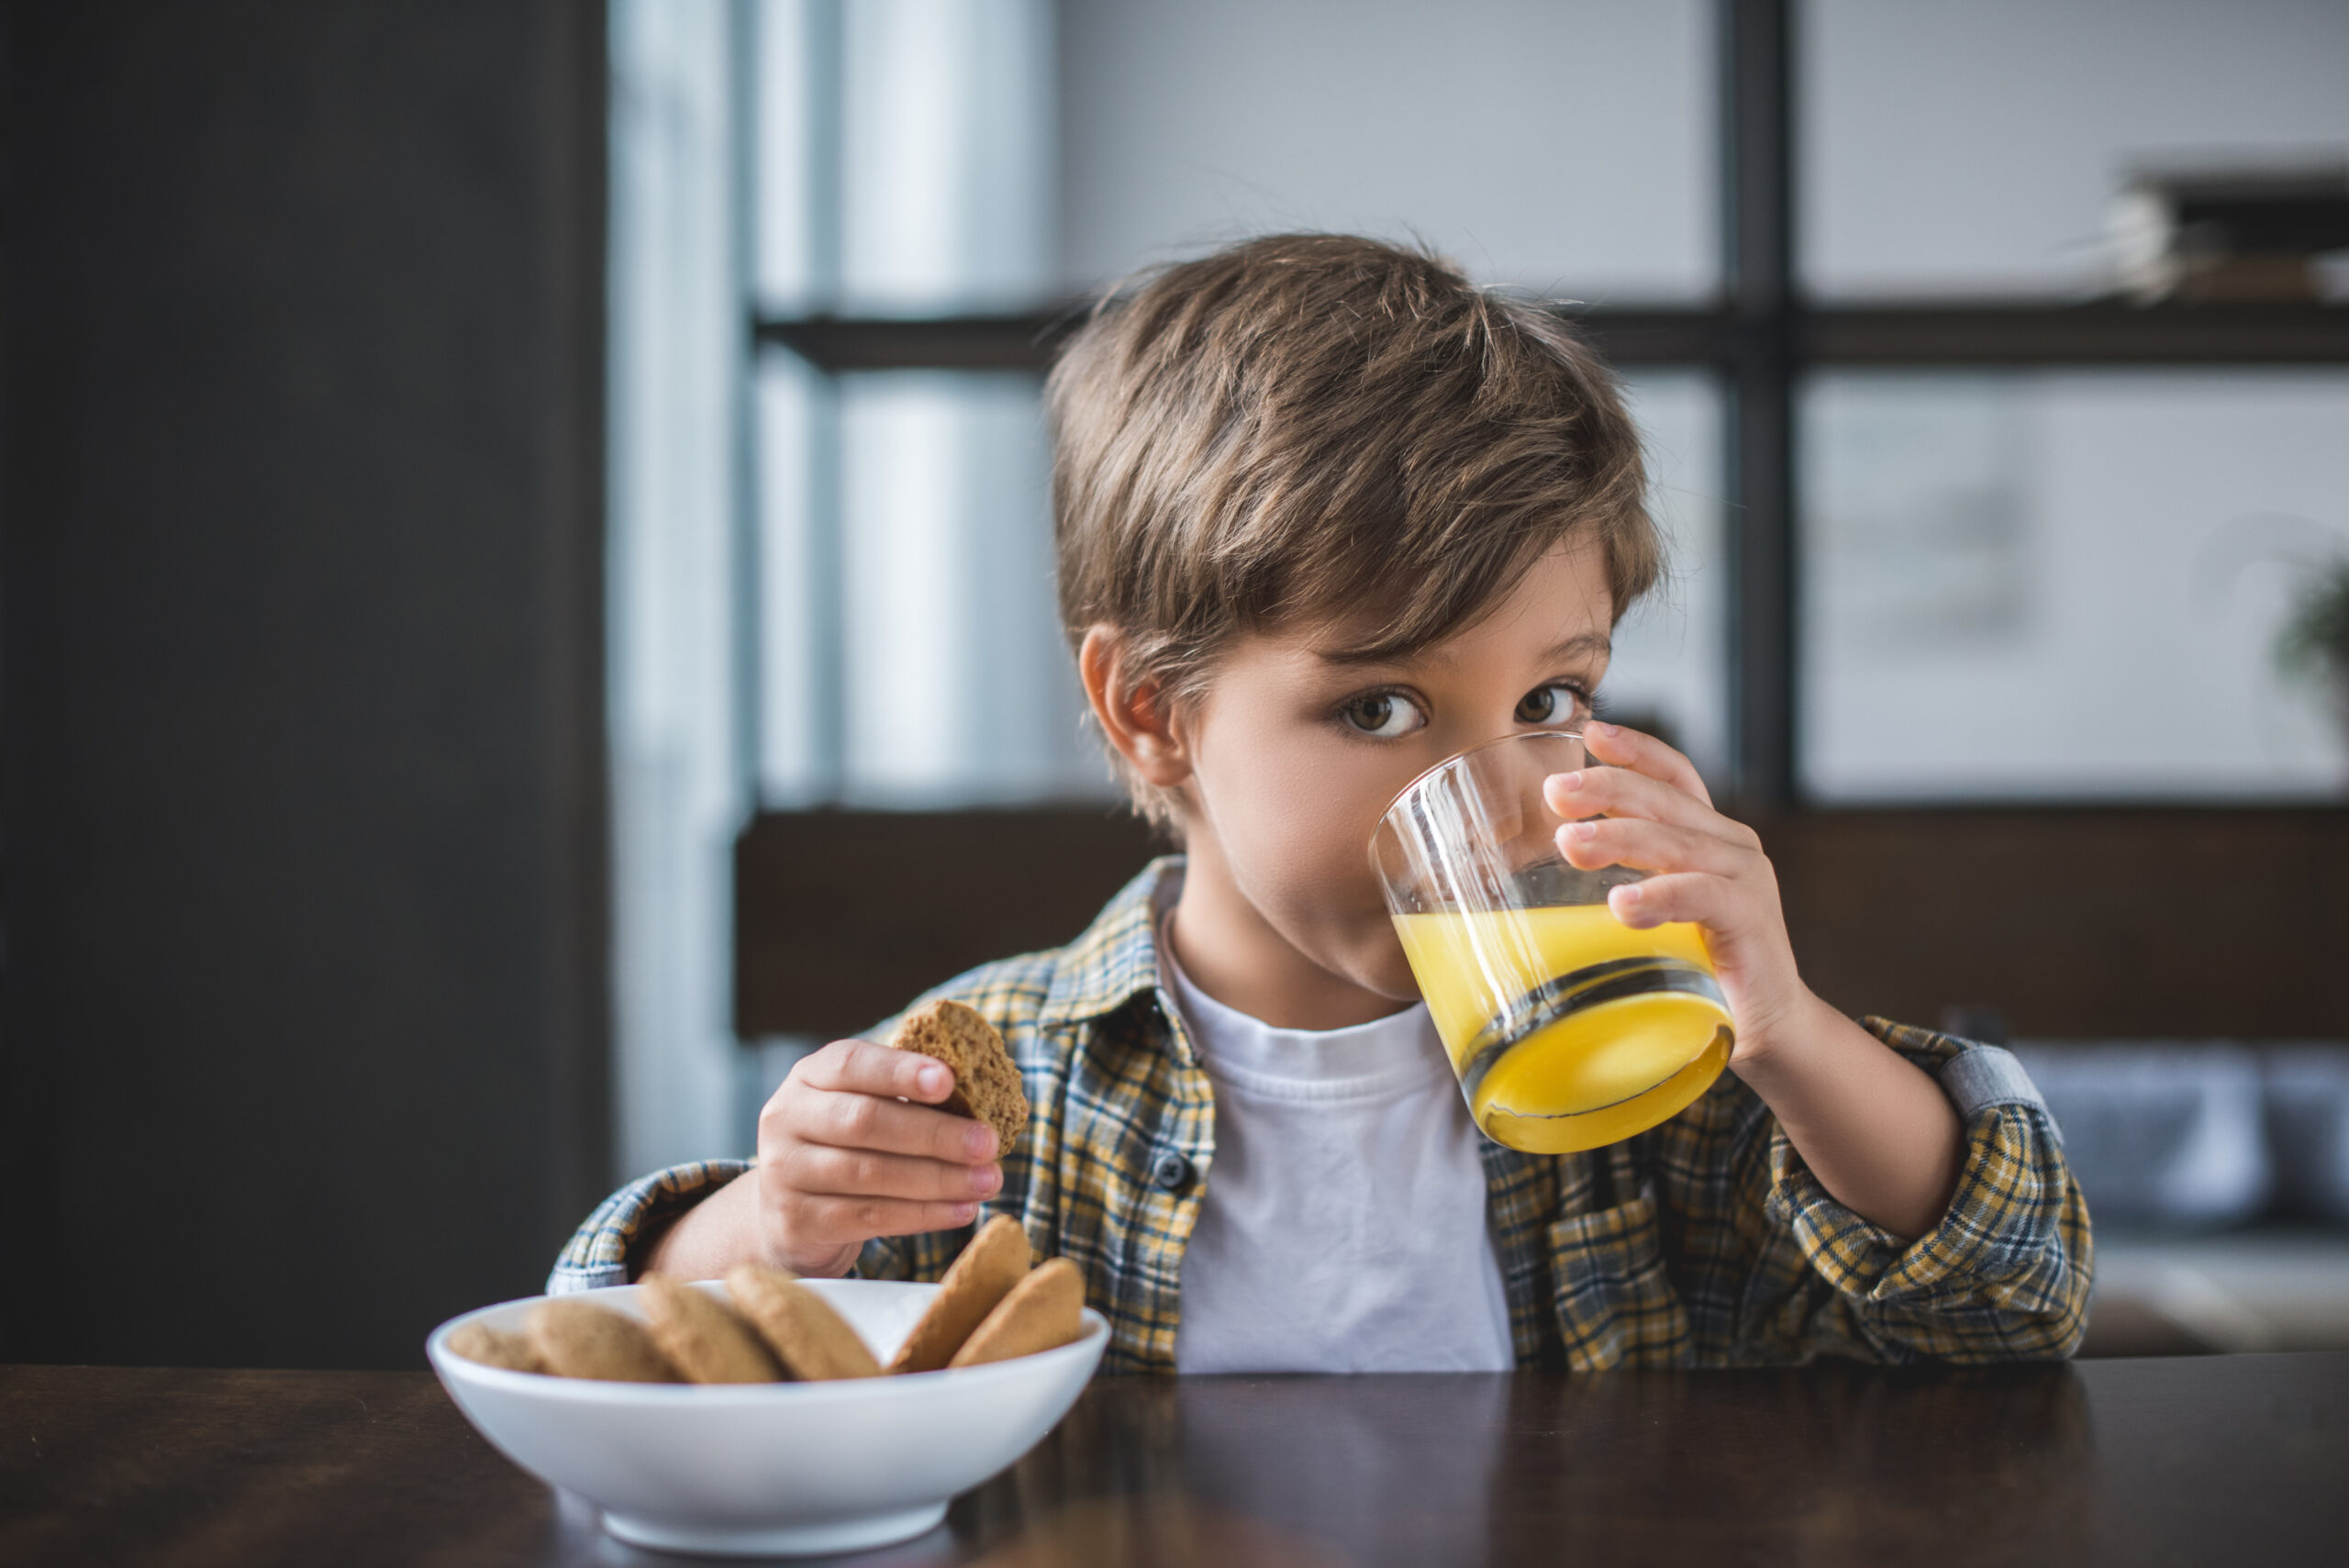 Fruit juices have potentially dangerous levels of lead and arsenic